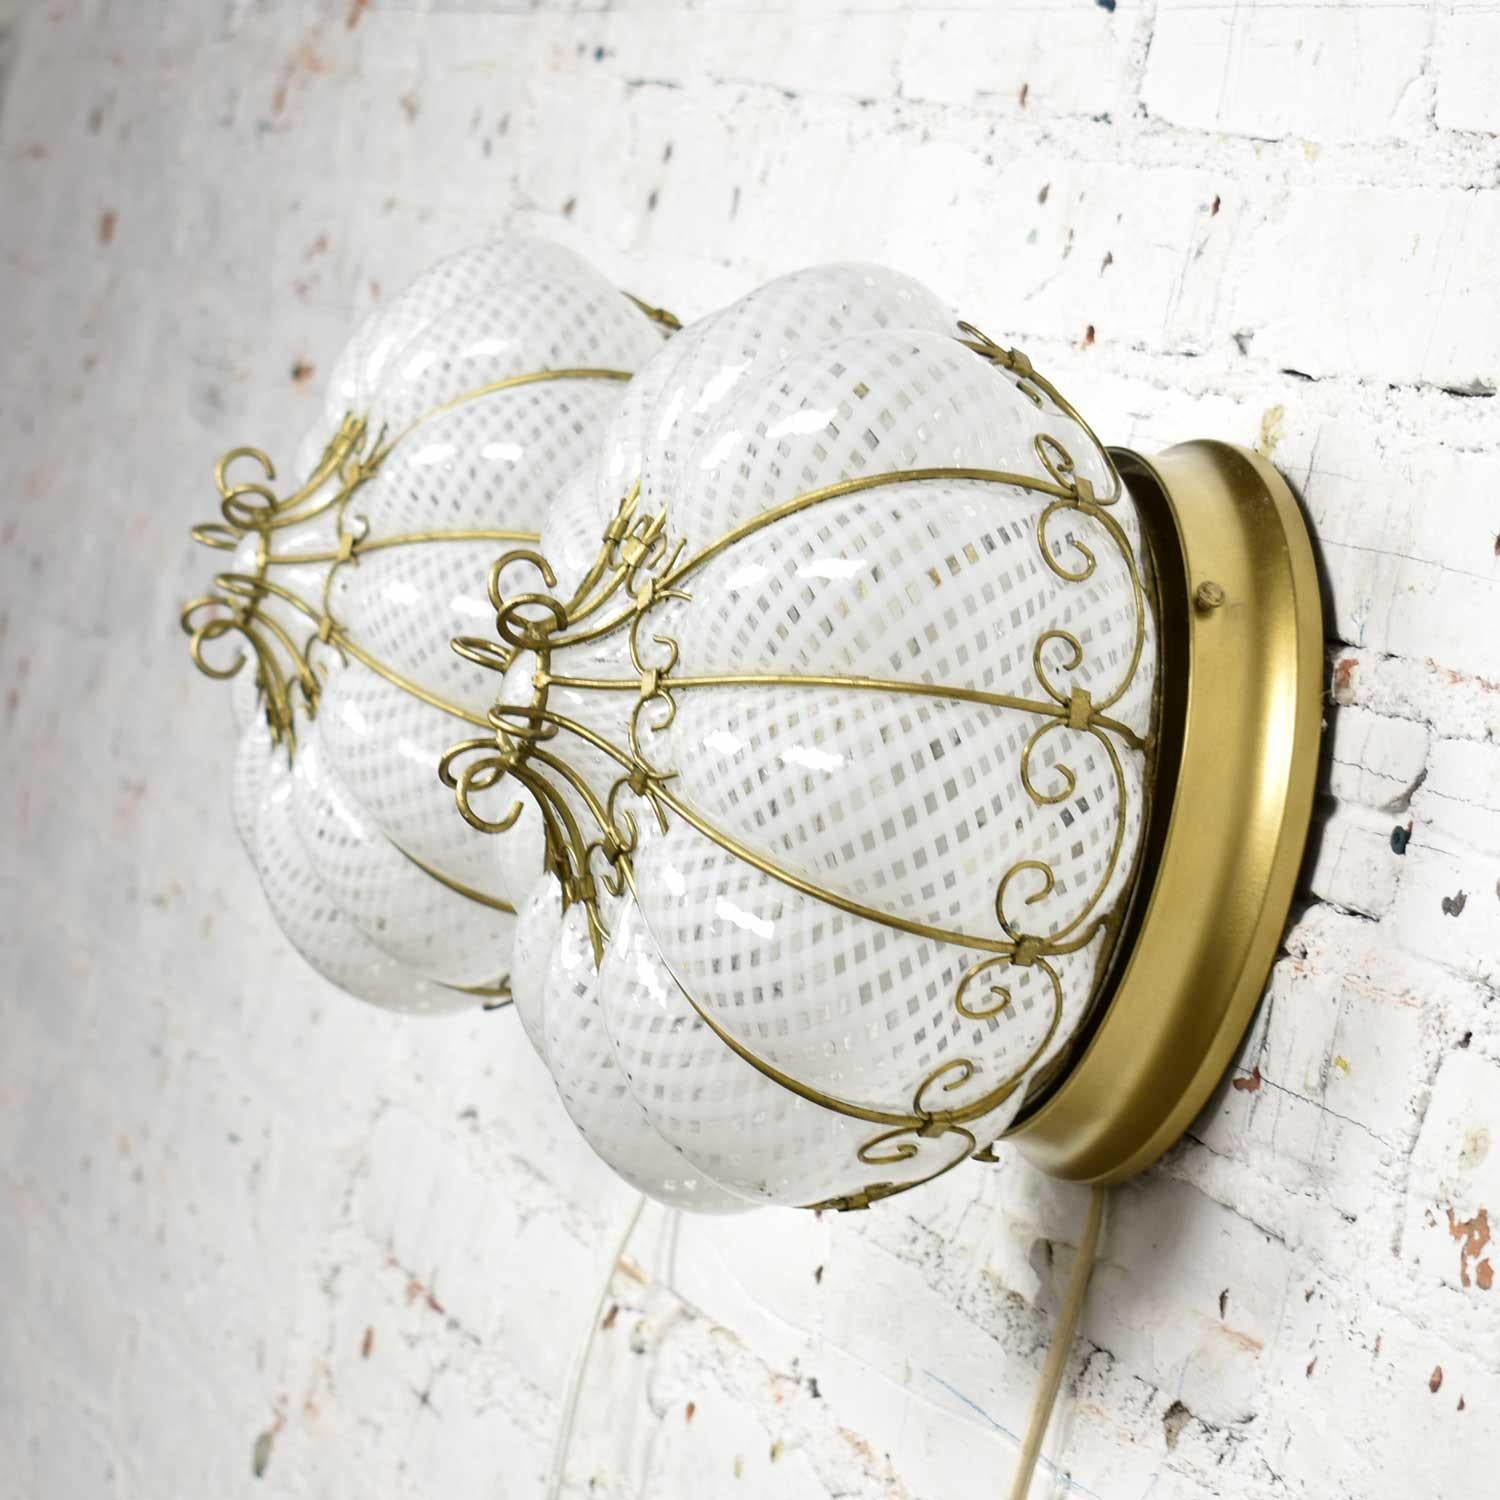 20th Century Midcentury Gold & White Caged Venetian Latticino Glass Ceiling Lights or Sconce